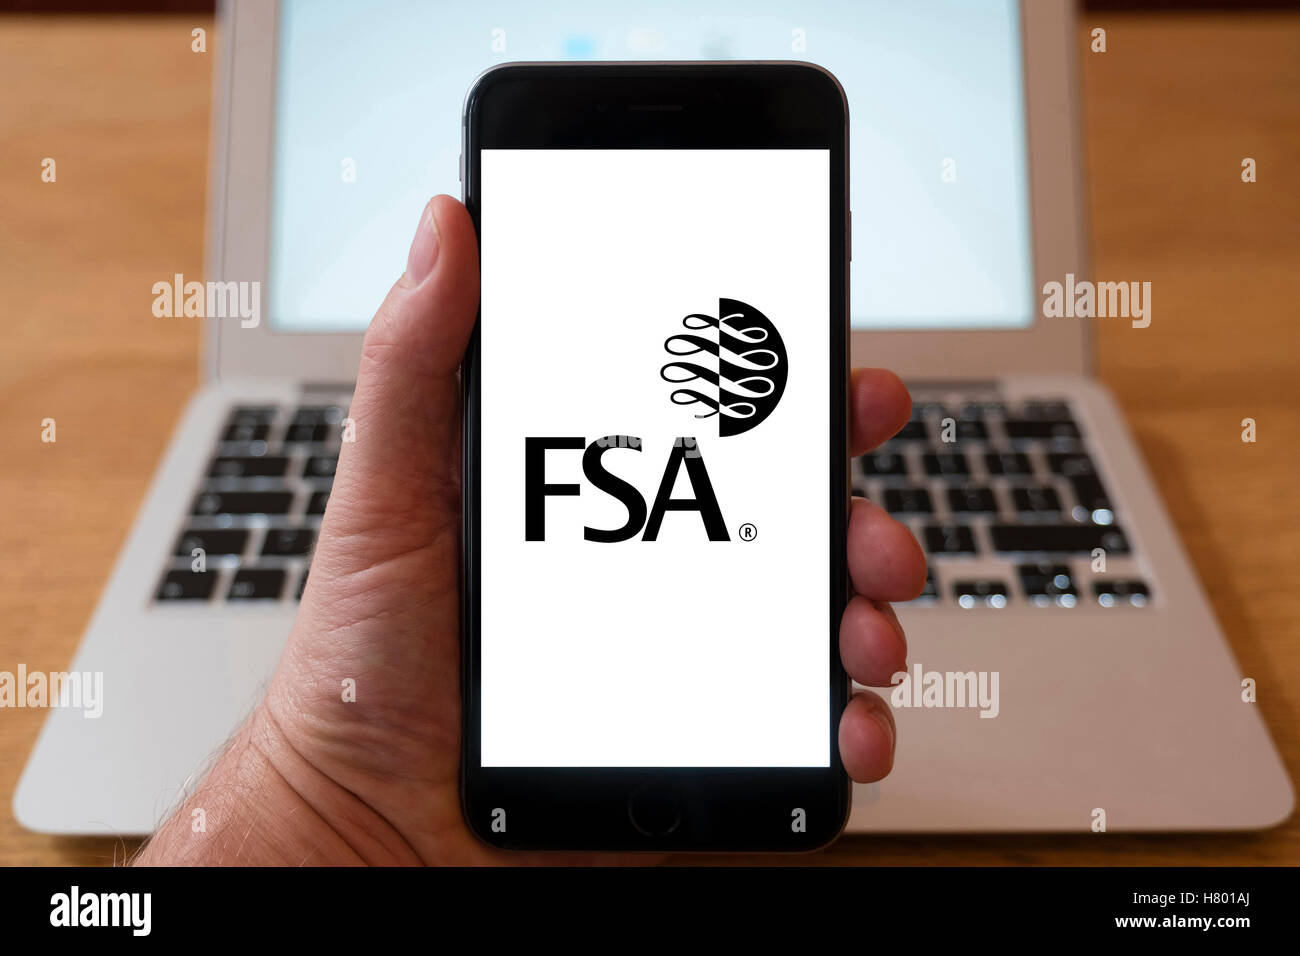 Using iPhone smartphone to display logo of FSA, Financial Services Authority Stock Photo